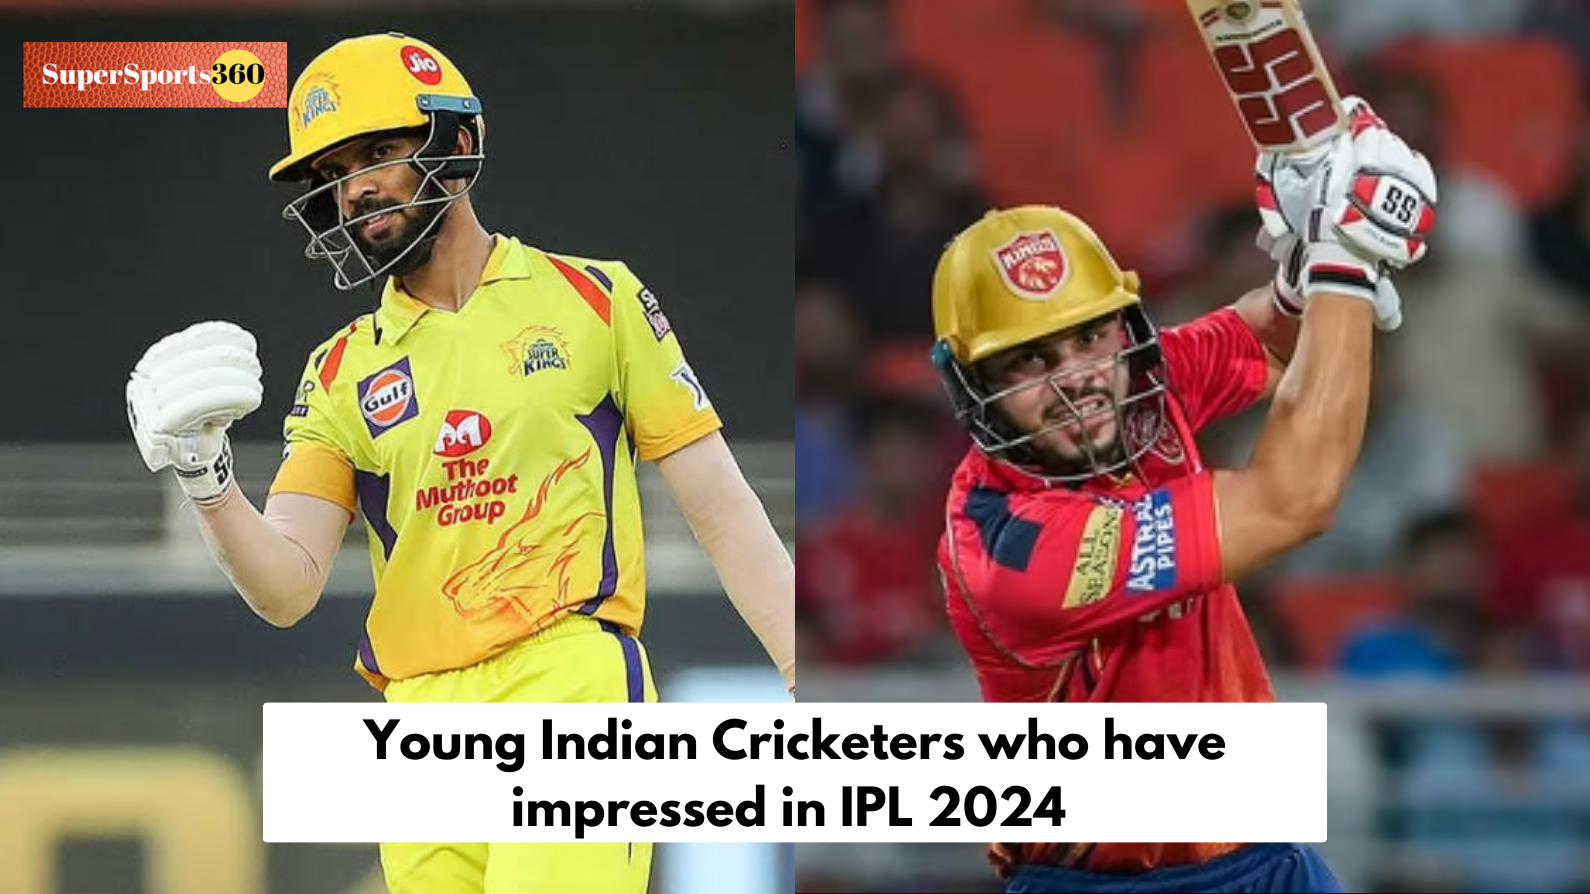 Young Indian Cricketers who have impressed in IPL 2024 